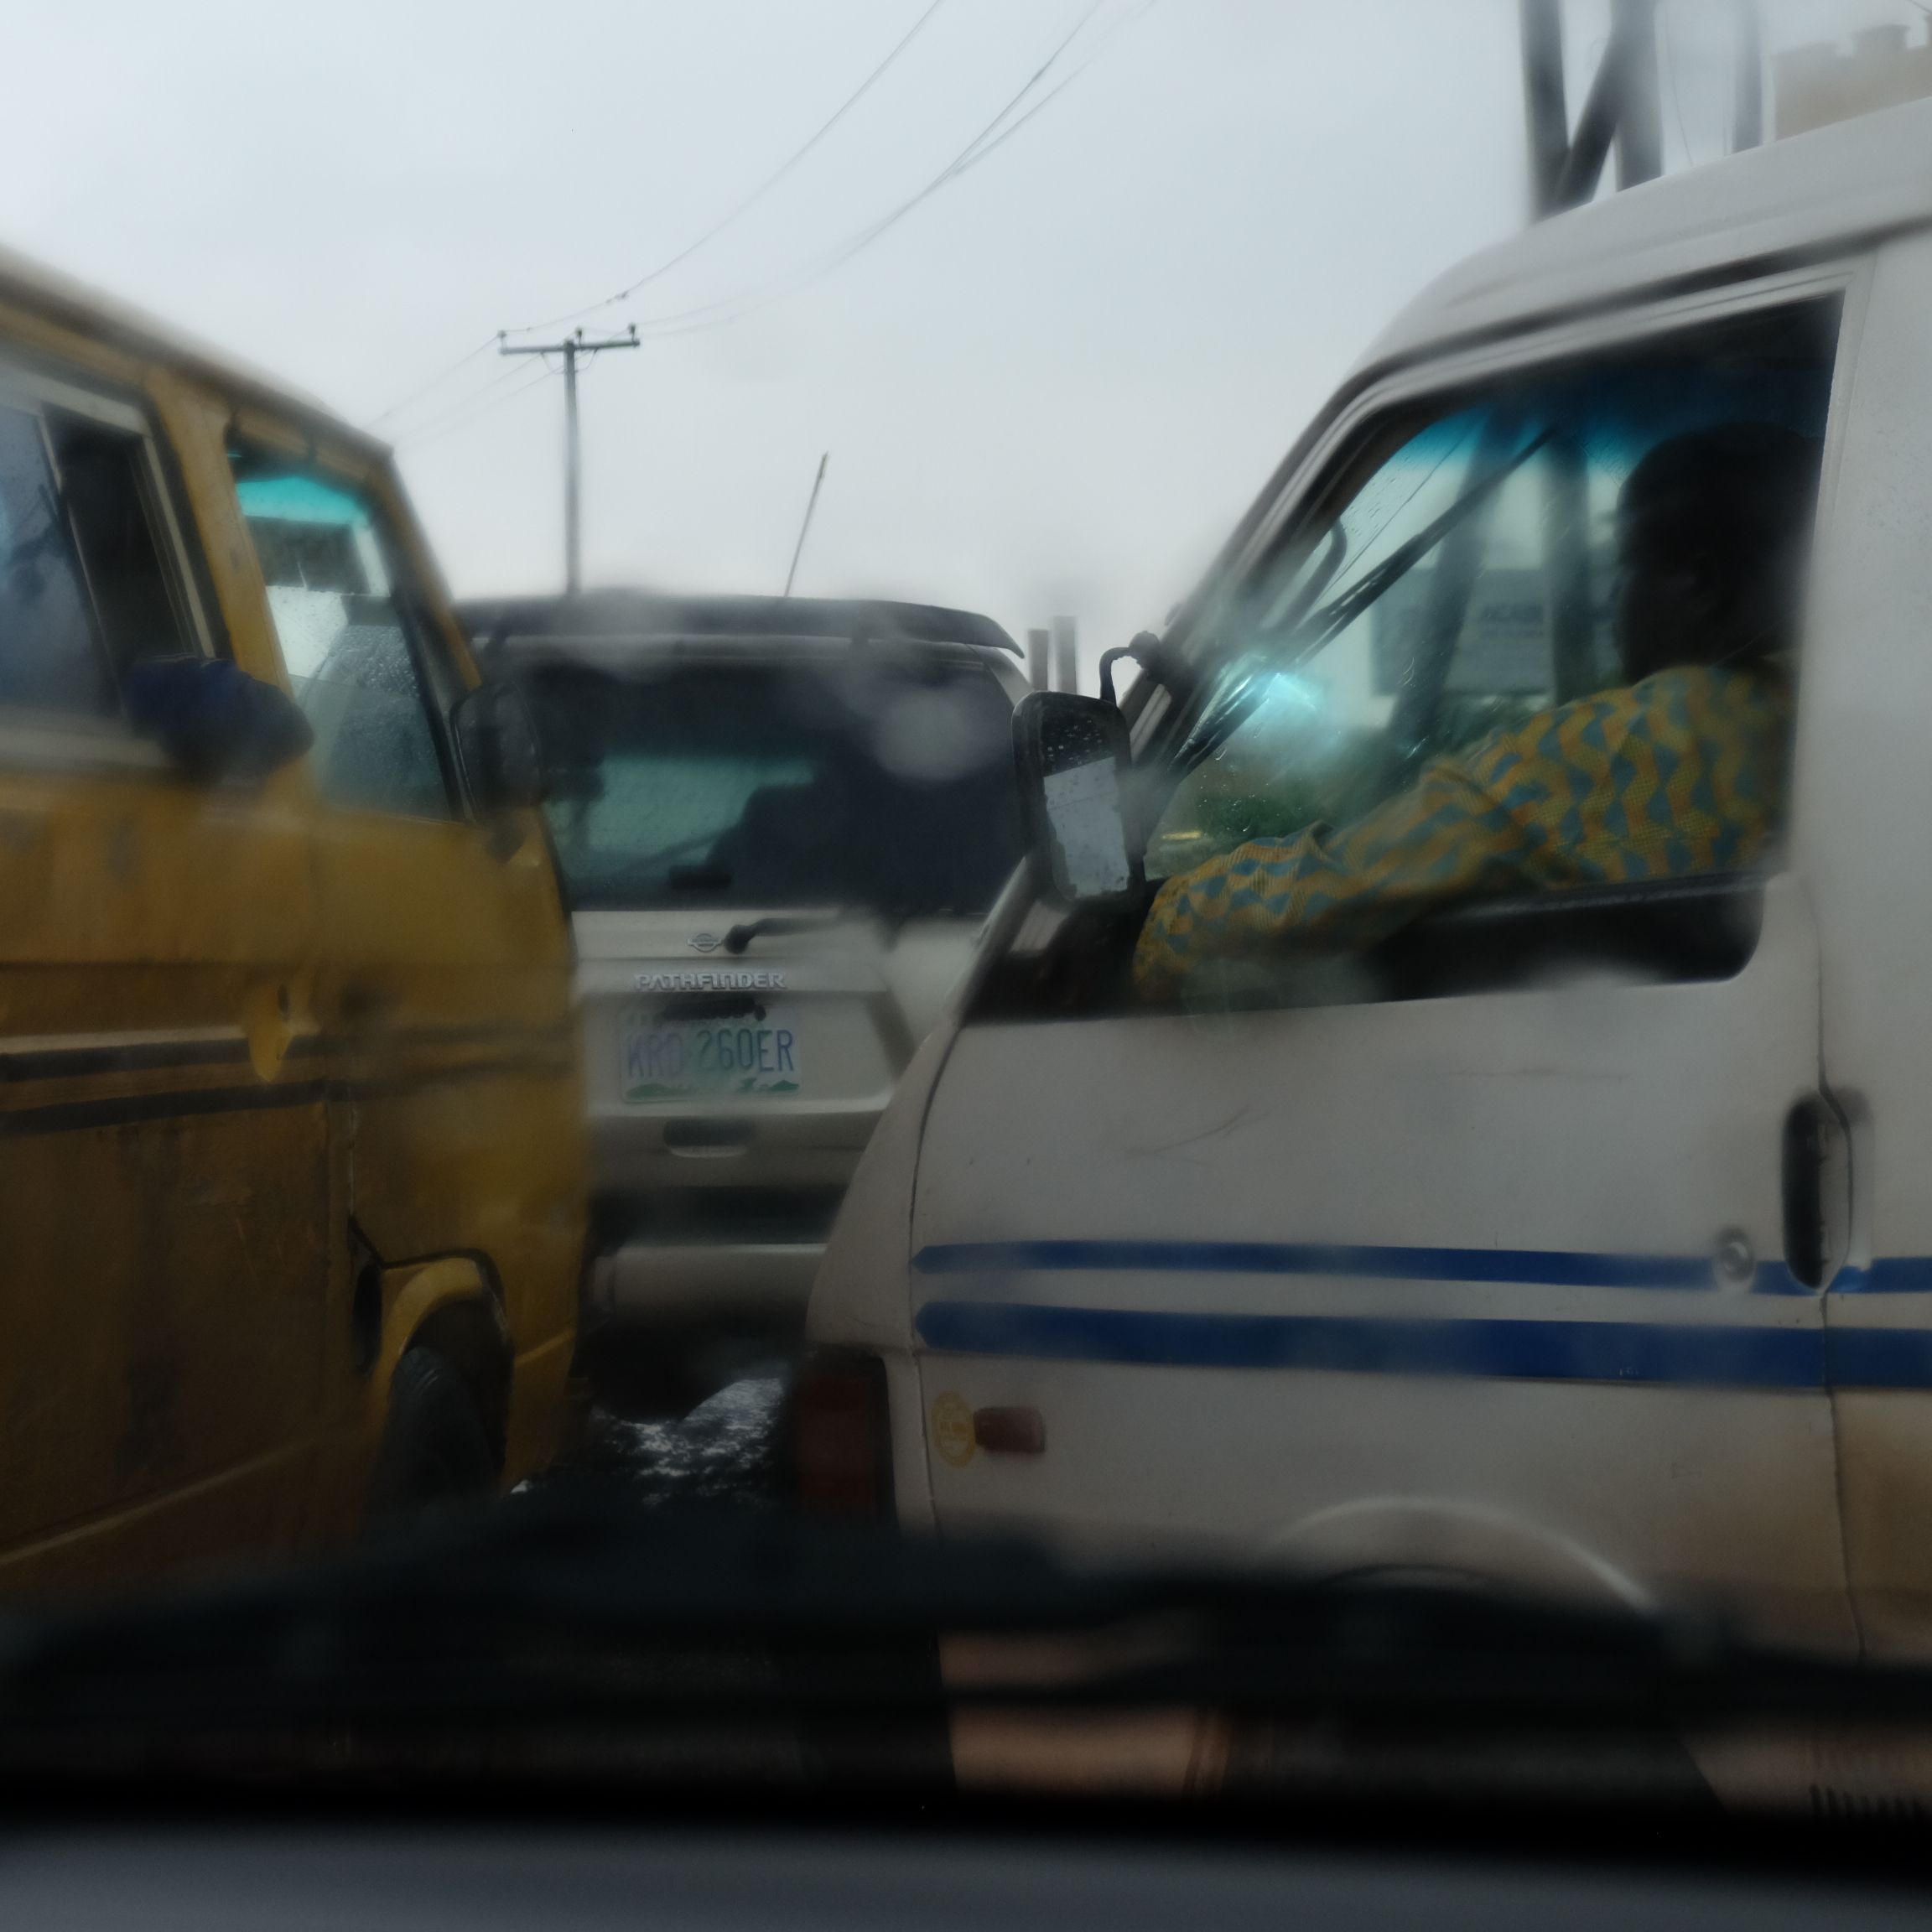 The intensity of Lagos' ferocious traffic jams can be almost hallucinatory in the first hours of one's arrival. Image by T.R. Goldman. Nigeria, 2017.